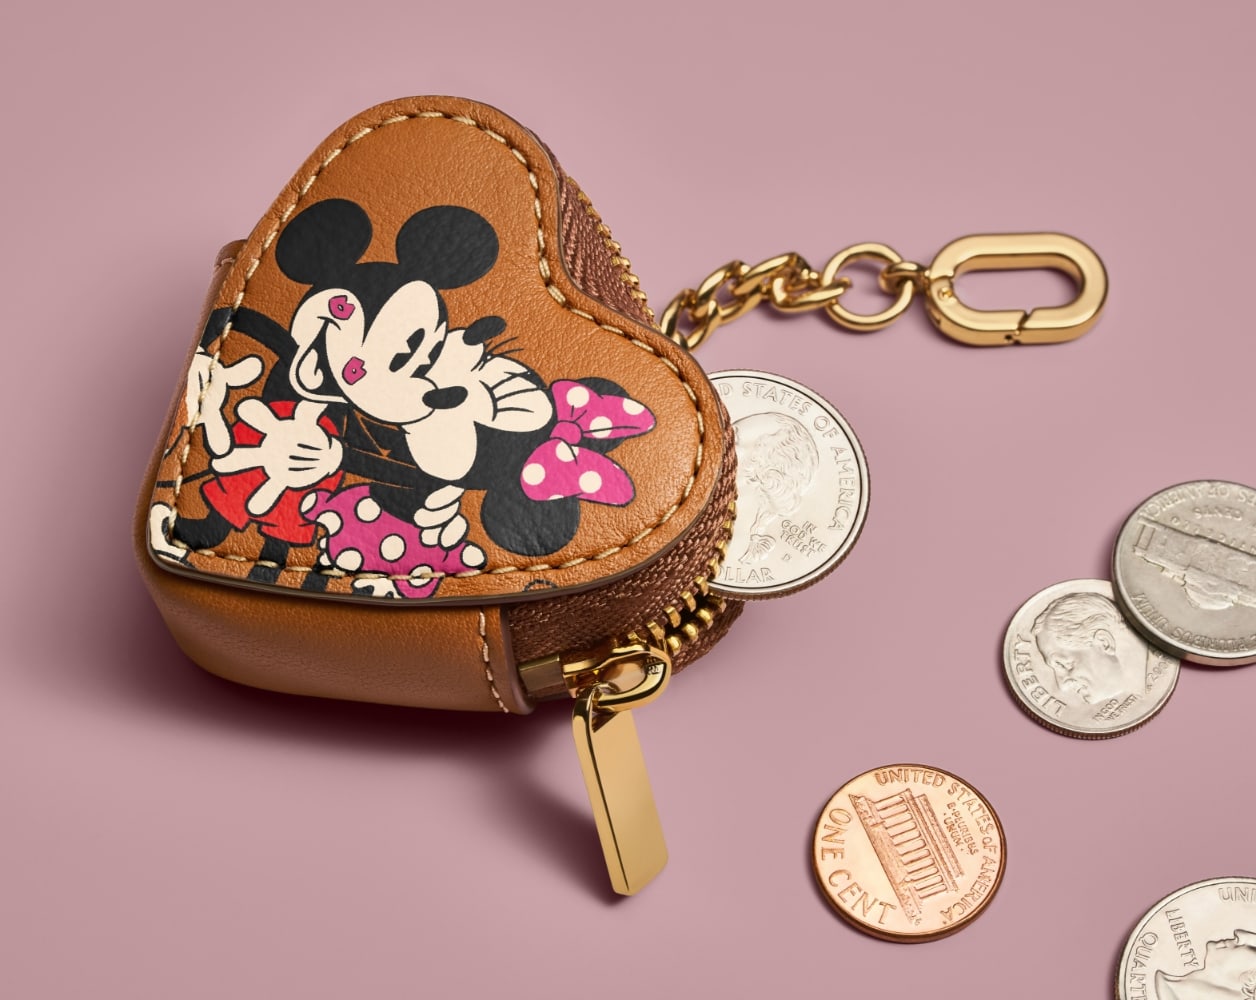 The brown leather heart-shaped coin purse, featuring an embossed graphic of Mickey Mouse and Minnie Mouse and showing various coins inside and around it.